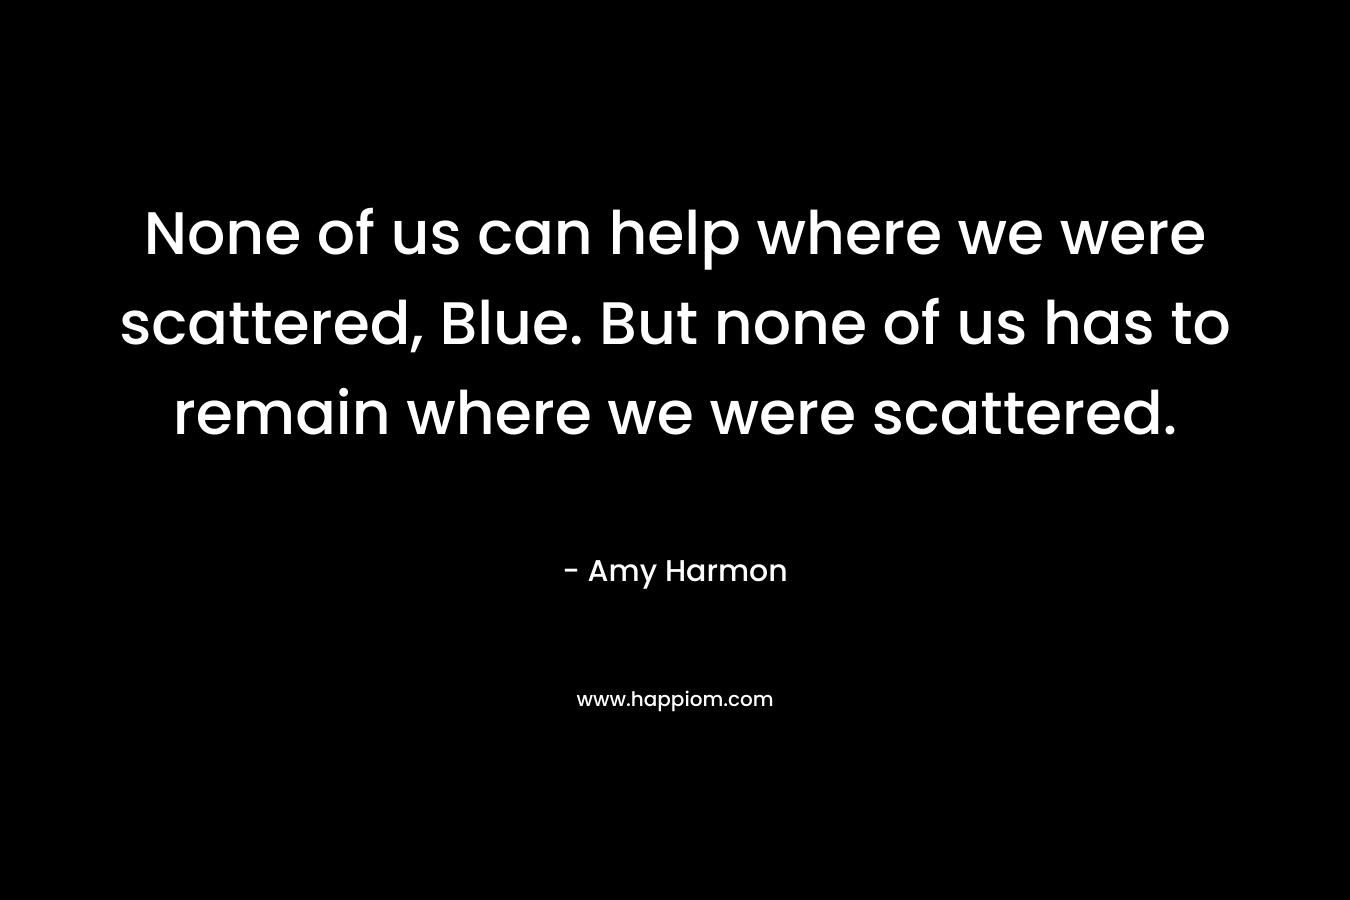 None of us can help where we were scattered, Blue. But none of us has to remain where we were scattered. – Amy Harmon